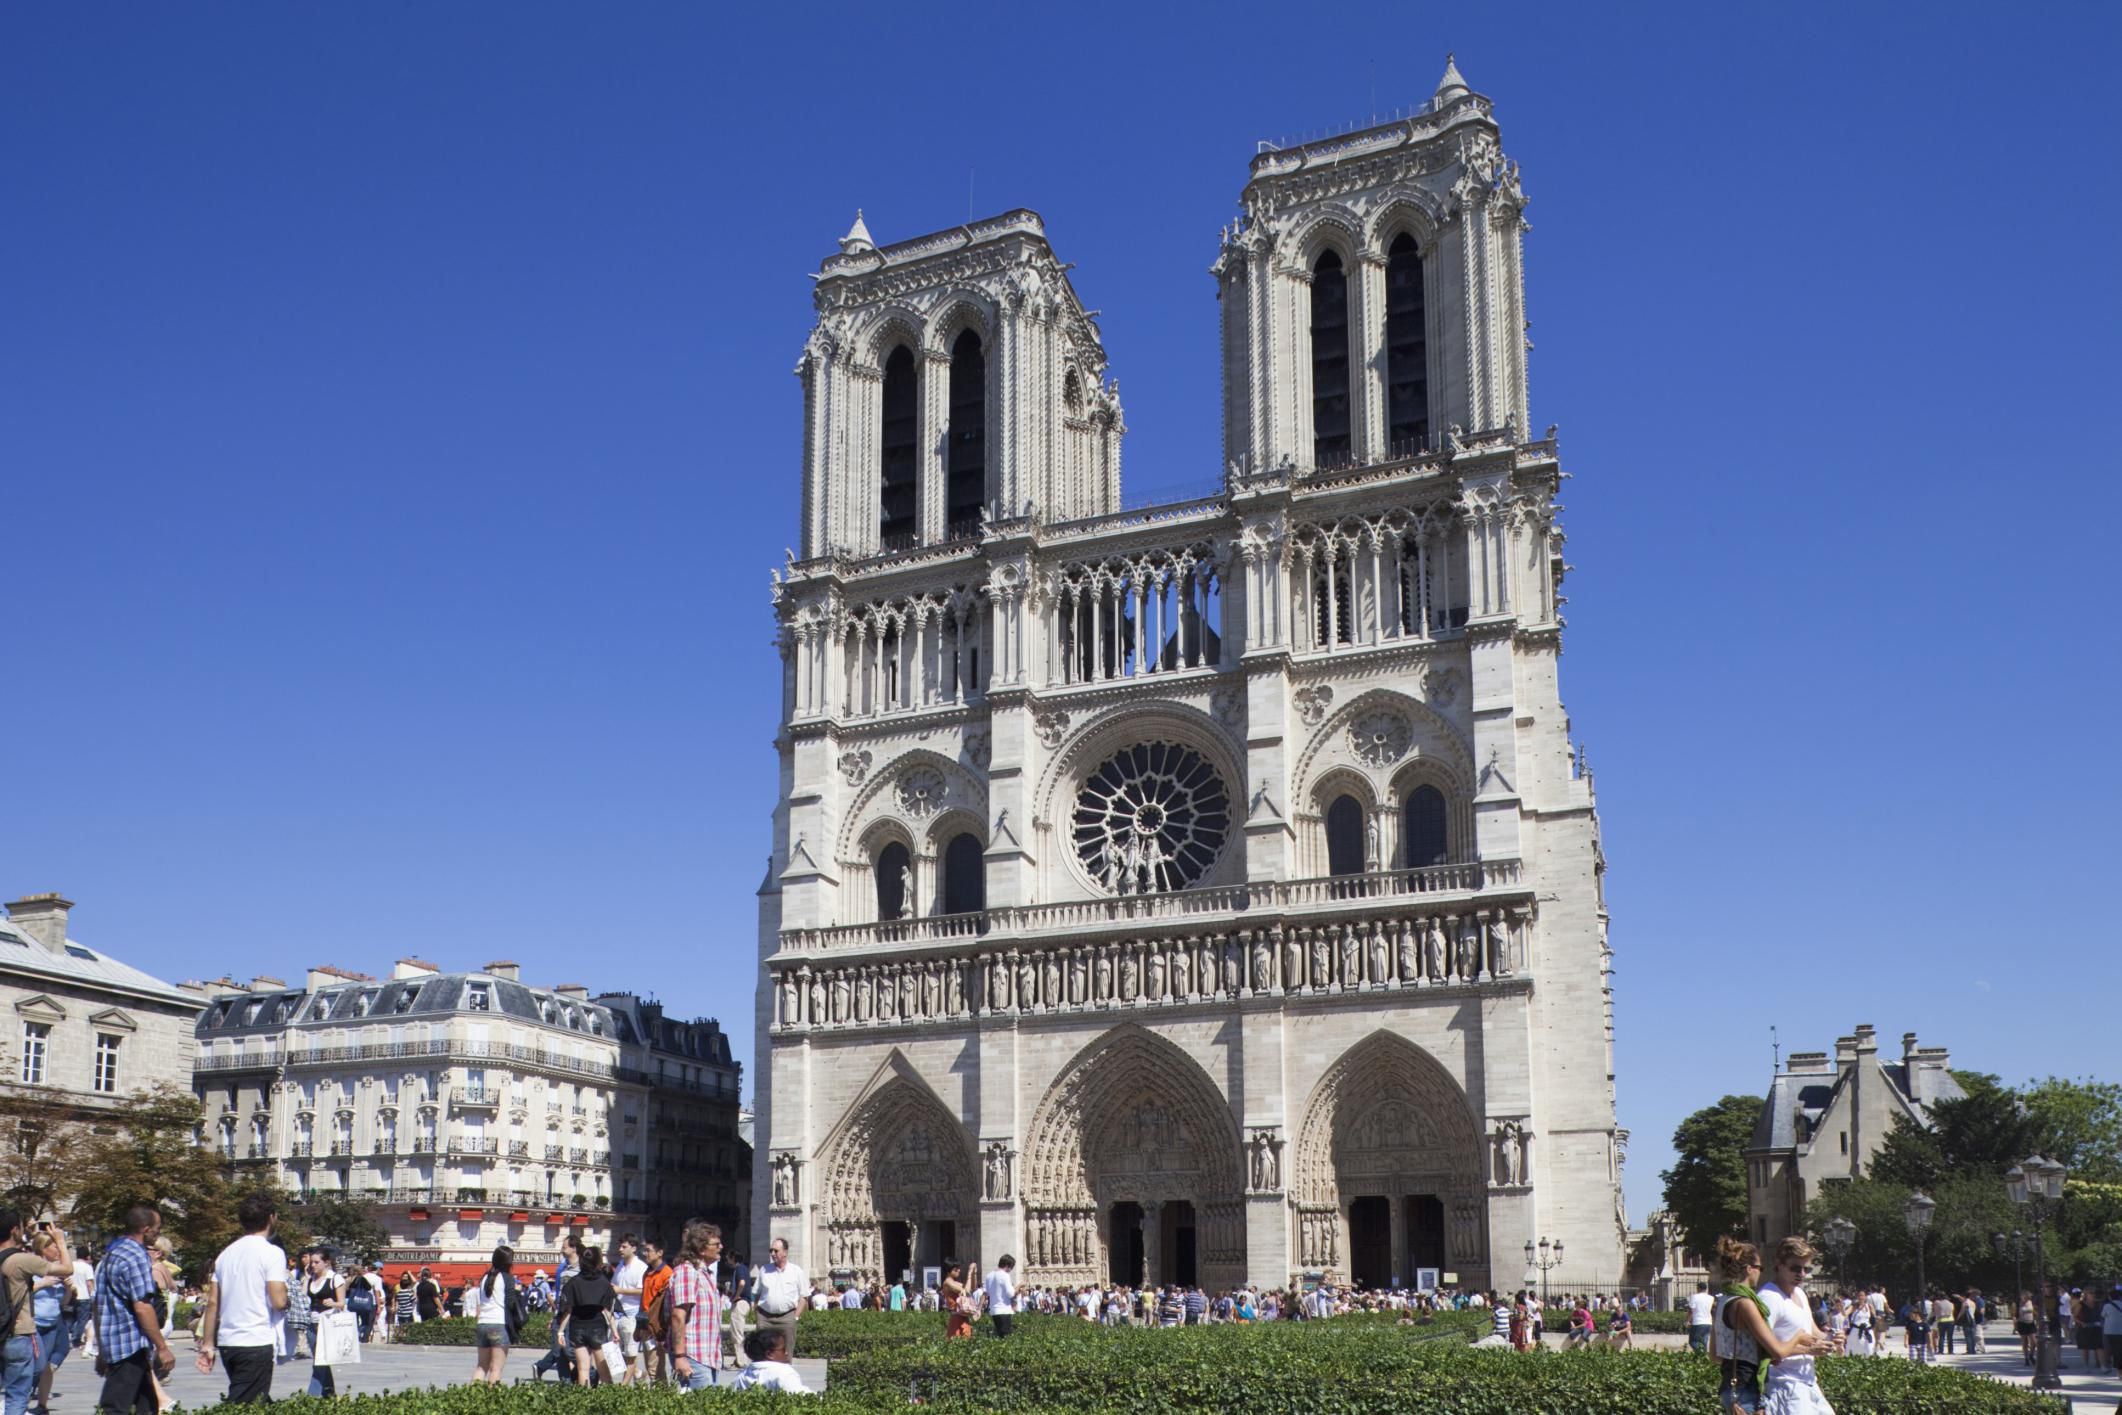 Highlights from Notre Dame Cathedral: Facts and Details